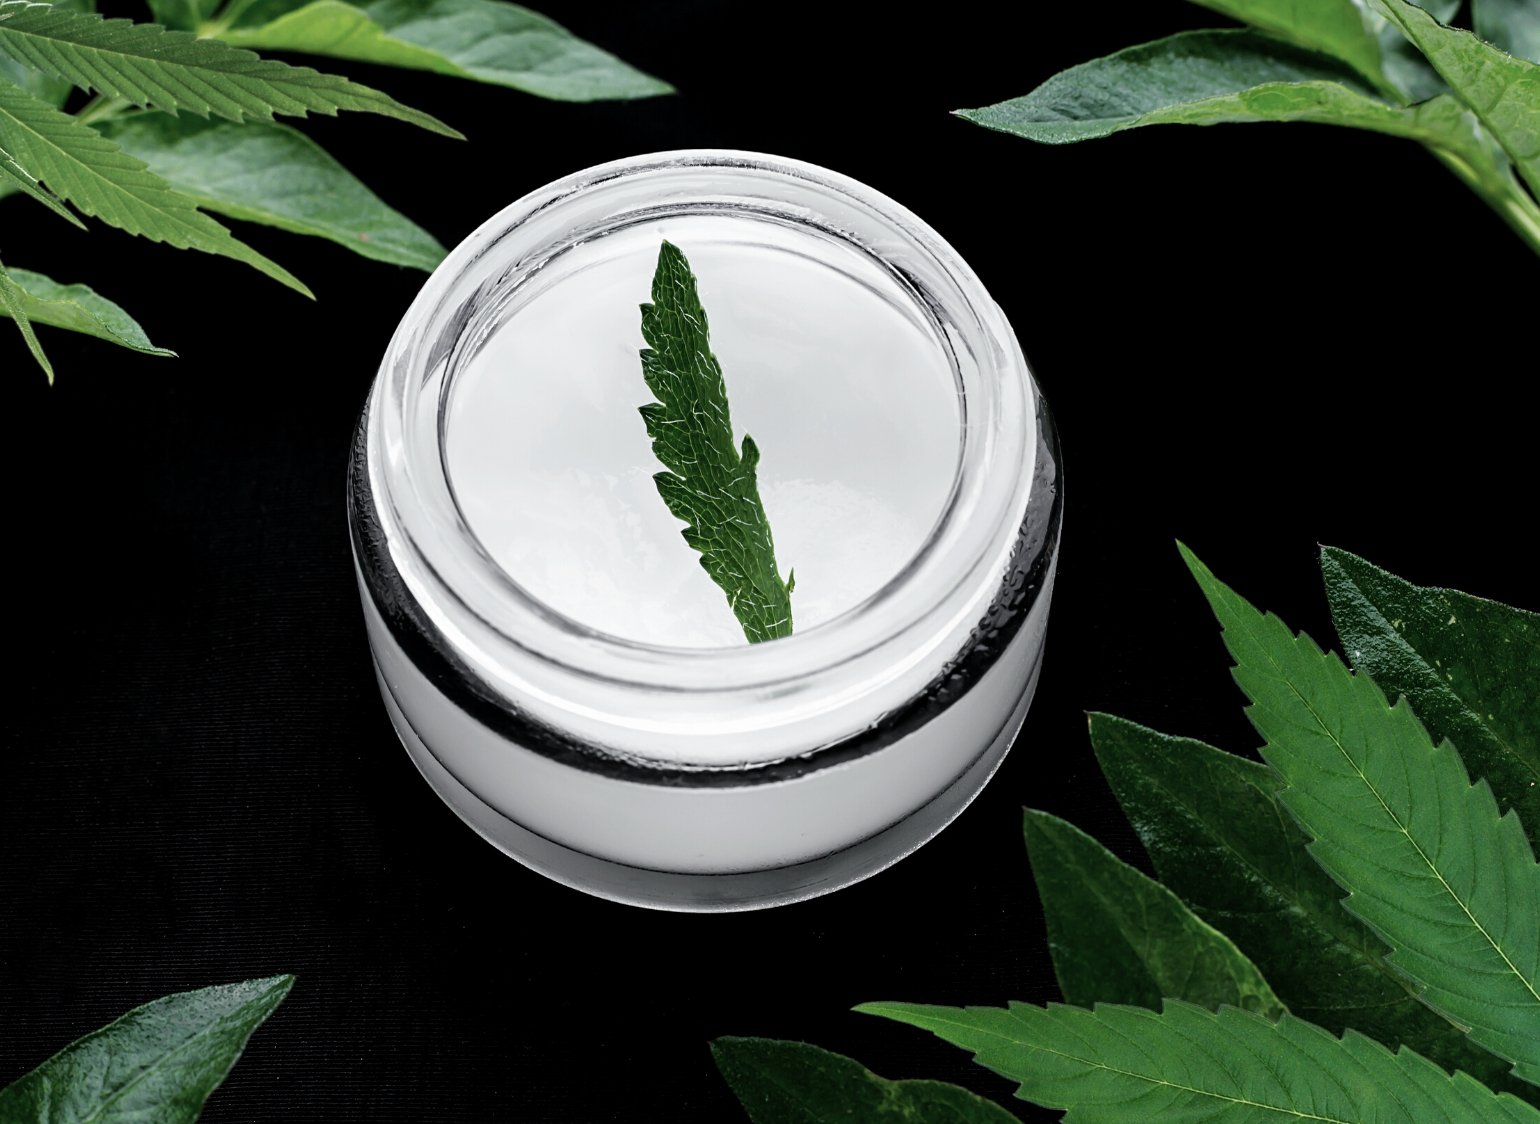 Topicals are cannabis-infused products designed for external use on the skin, providing localized relief without inducing a psychoactive high. 